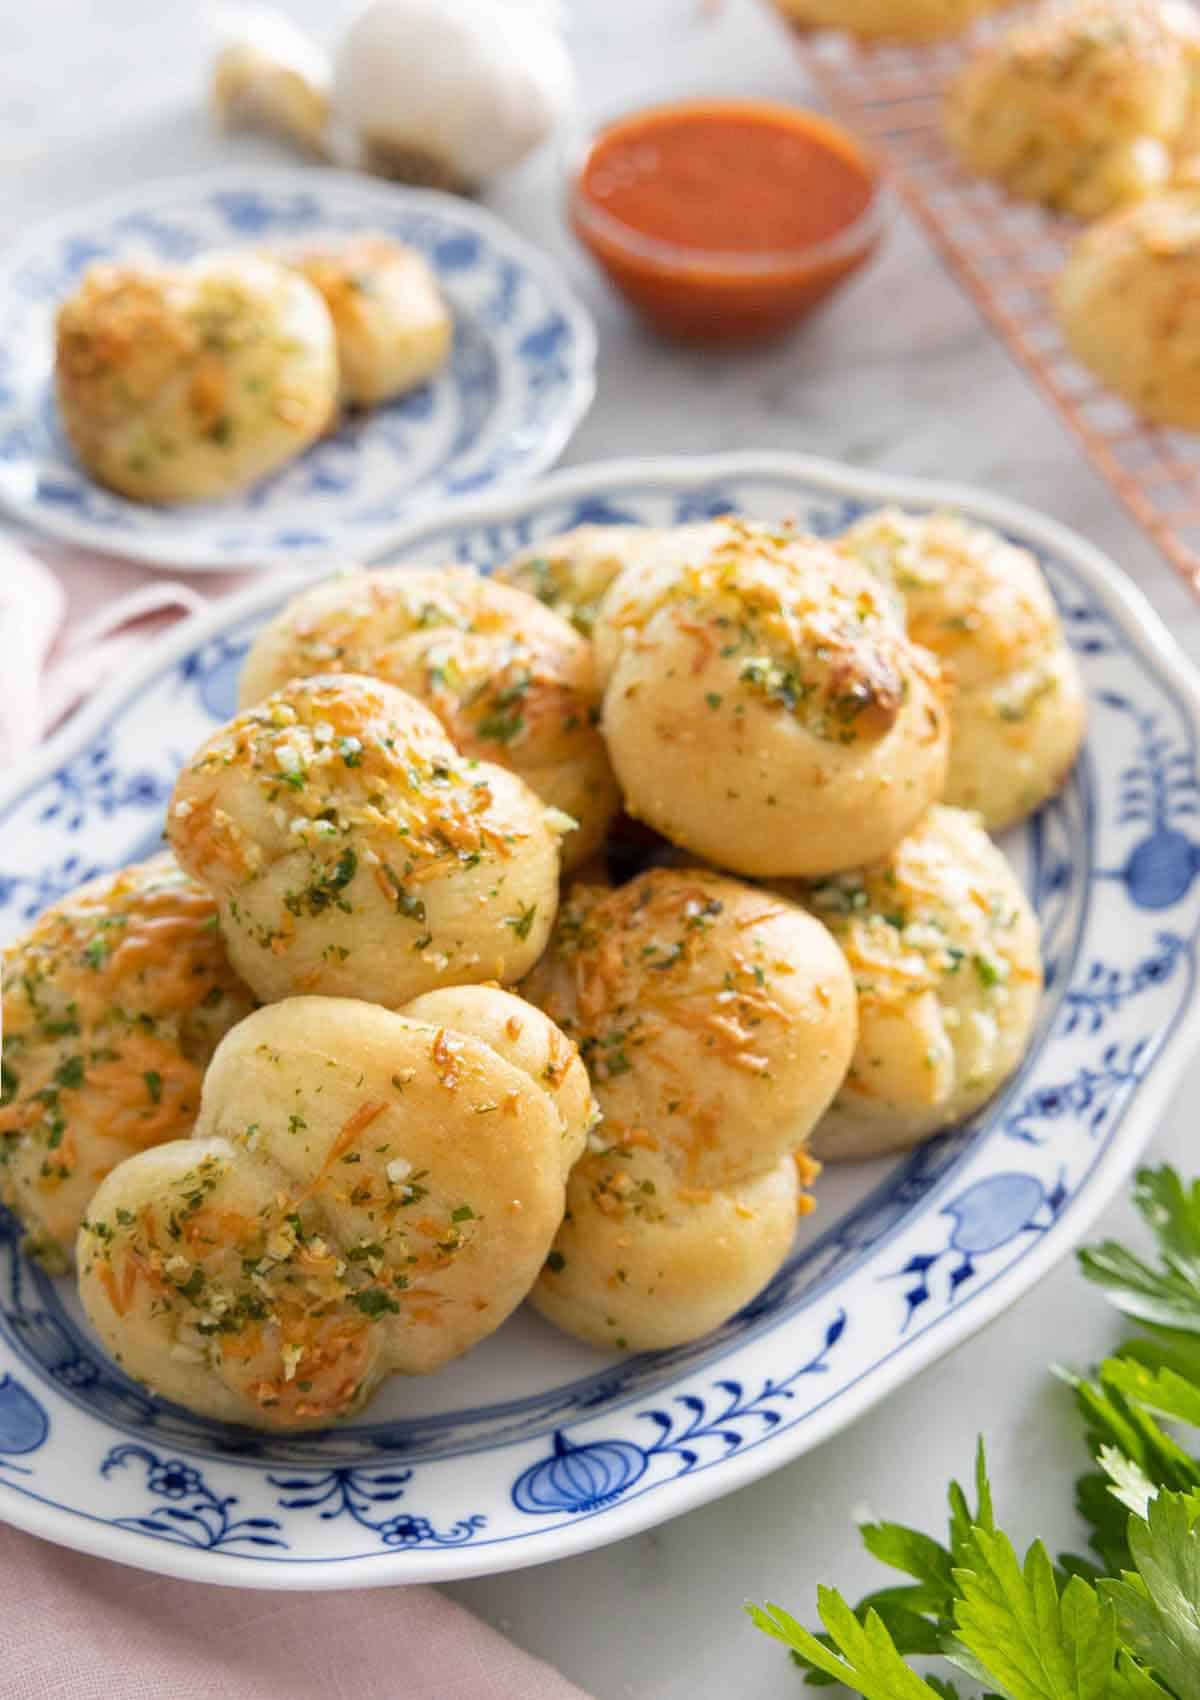 A plate with multiple garlic knots.